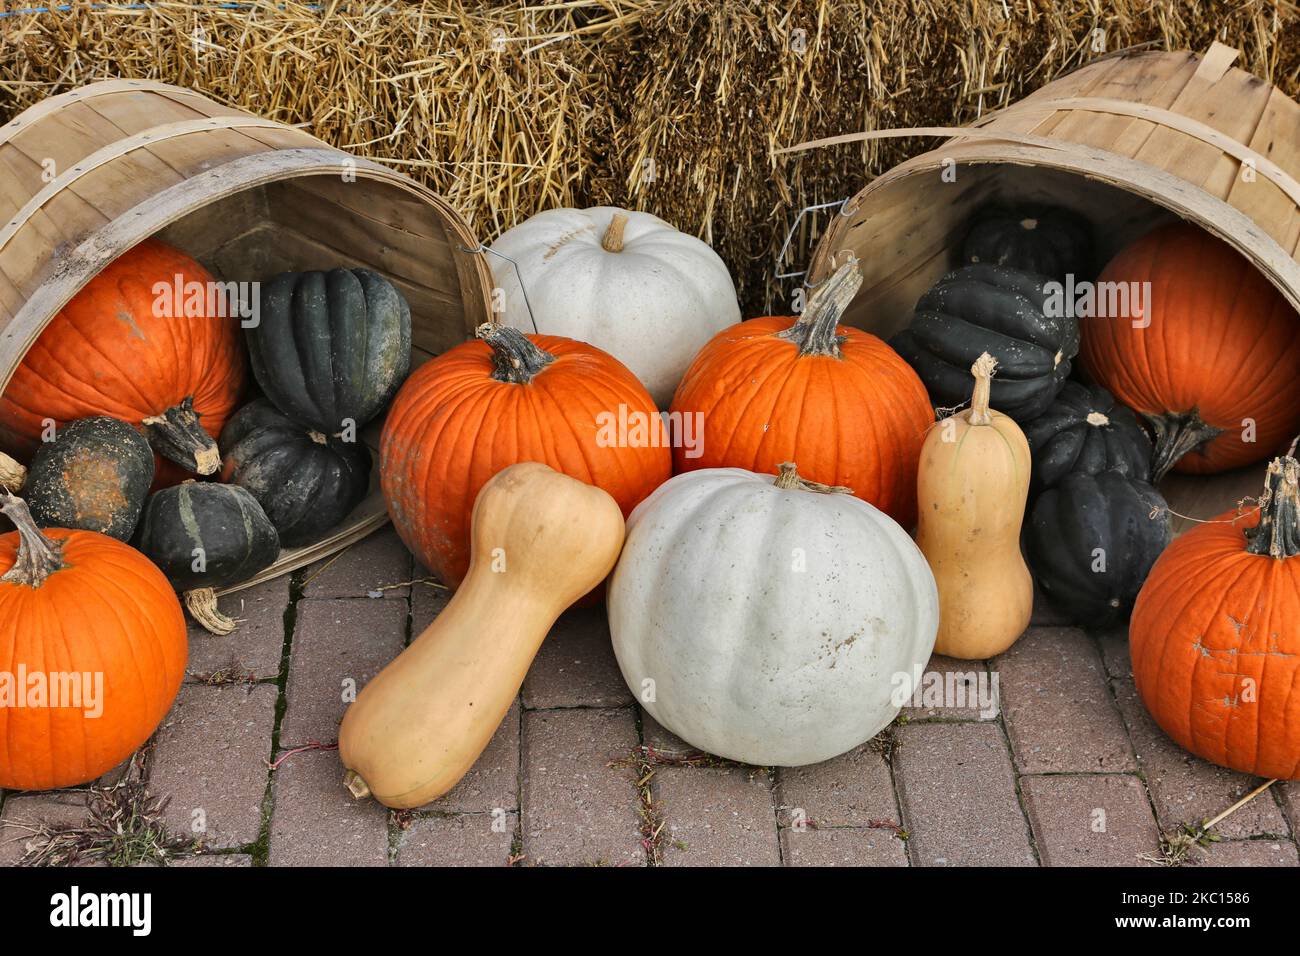 Pumpkins and squash at a farm during the novel coronavirus (COVID-19) pandemic in Markham, Ontario, Canada, on October 03, 2020. Cases of COVID-19 continue to rise, with record daily numbers across the Greater Toronto Area. Calls to place the city of Toronto back into lockdown to slow the spread of the virus are mounting from healthcare officials. (Photo by Creative Touch Imaging Ltd./NurPhoto) Stock Photo